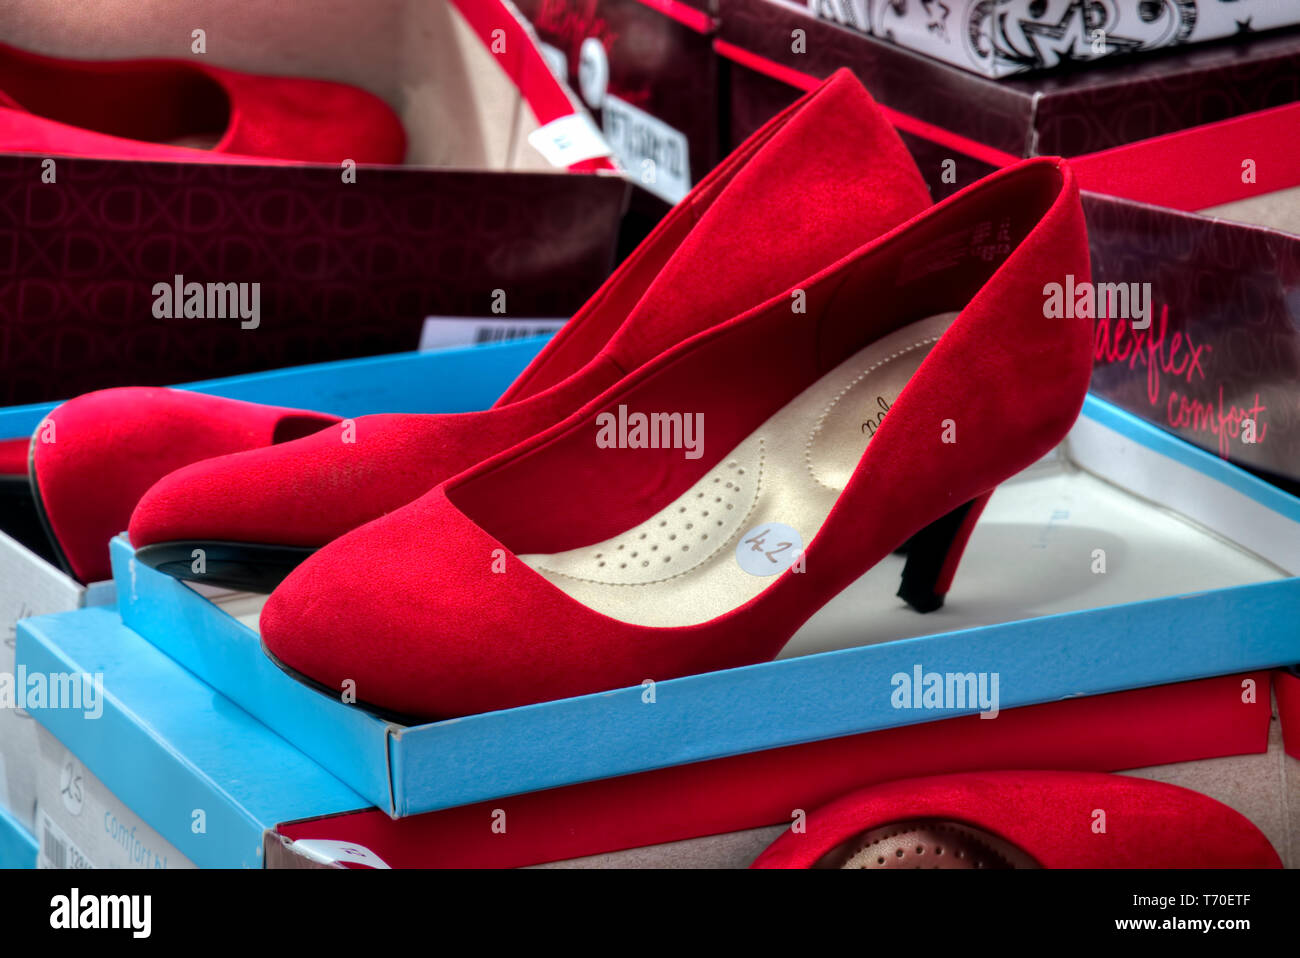 Red suede high heels used in a Walk a Mile in Her Shoes campaign to raise awareness for gender equality. Stock Photo